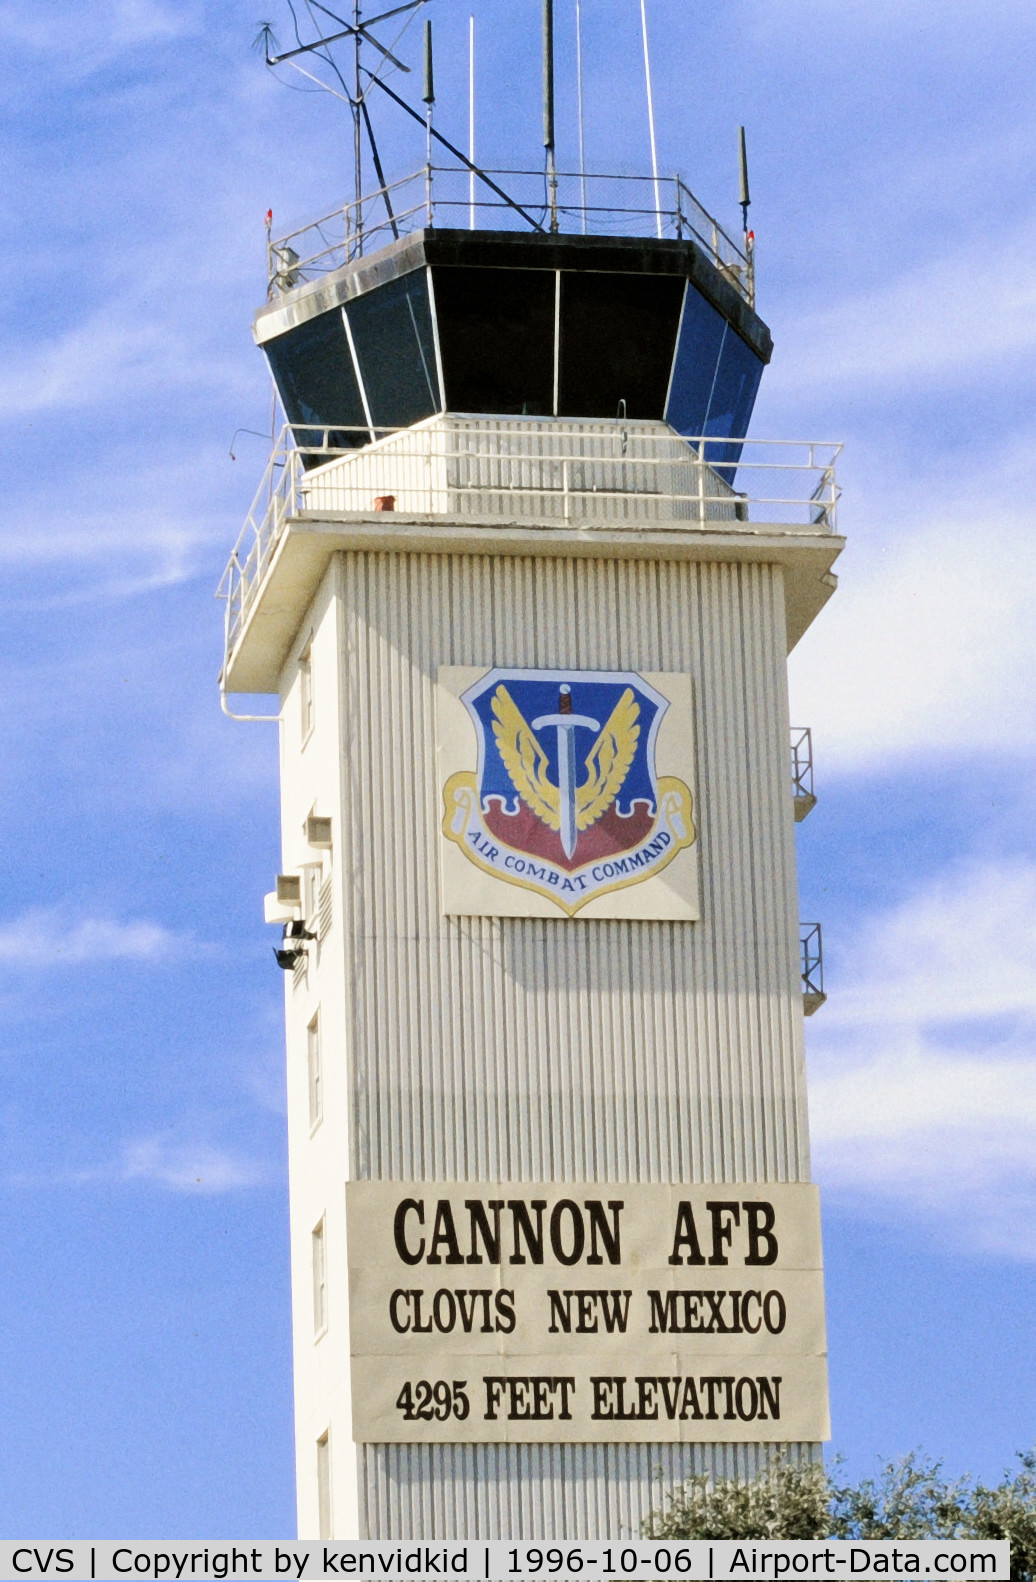 Cannon Afb Airport (CVS) - Copied from slide.